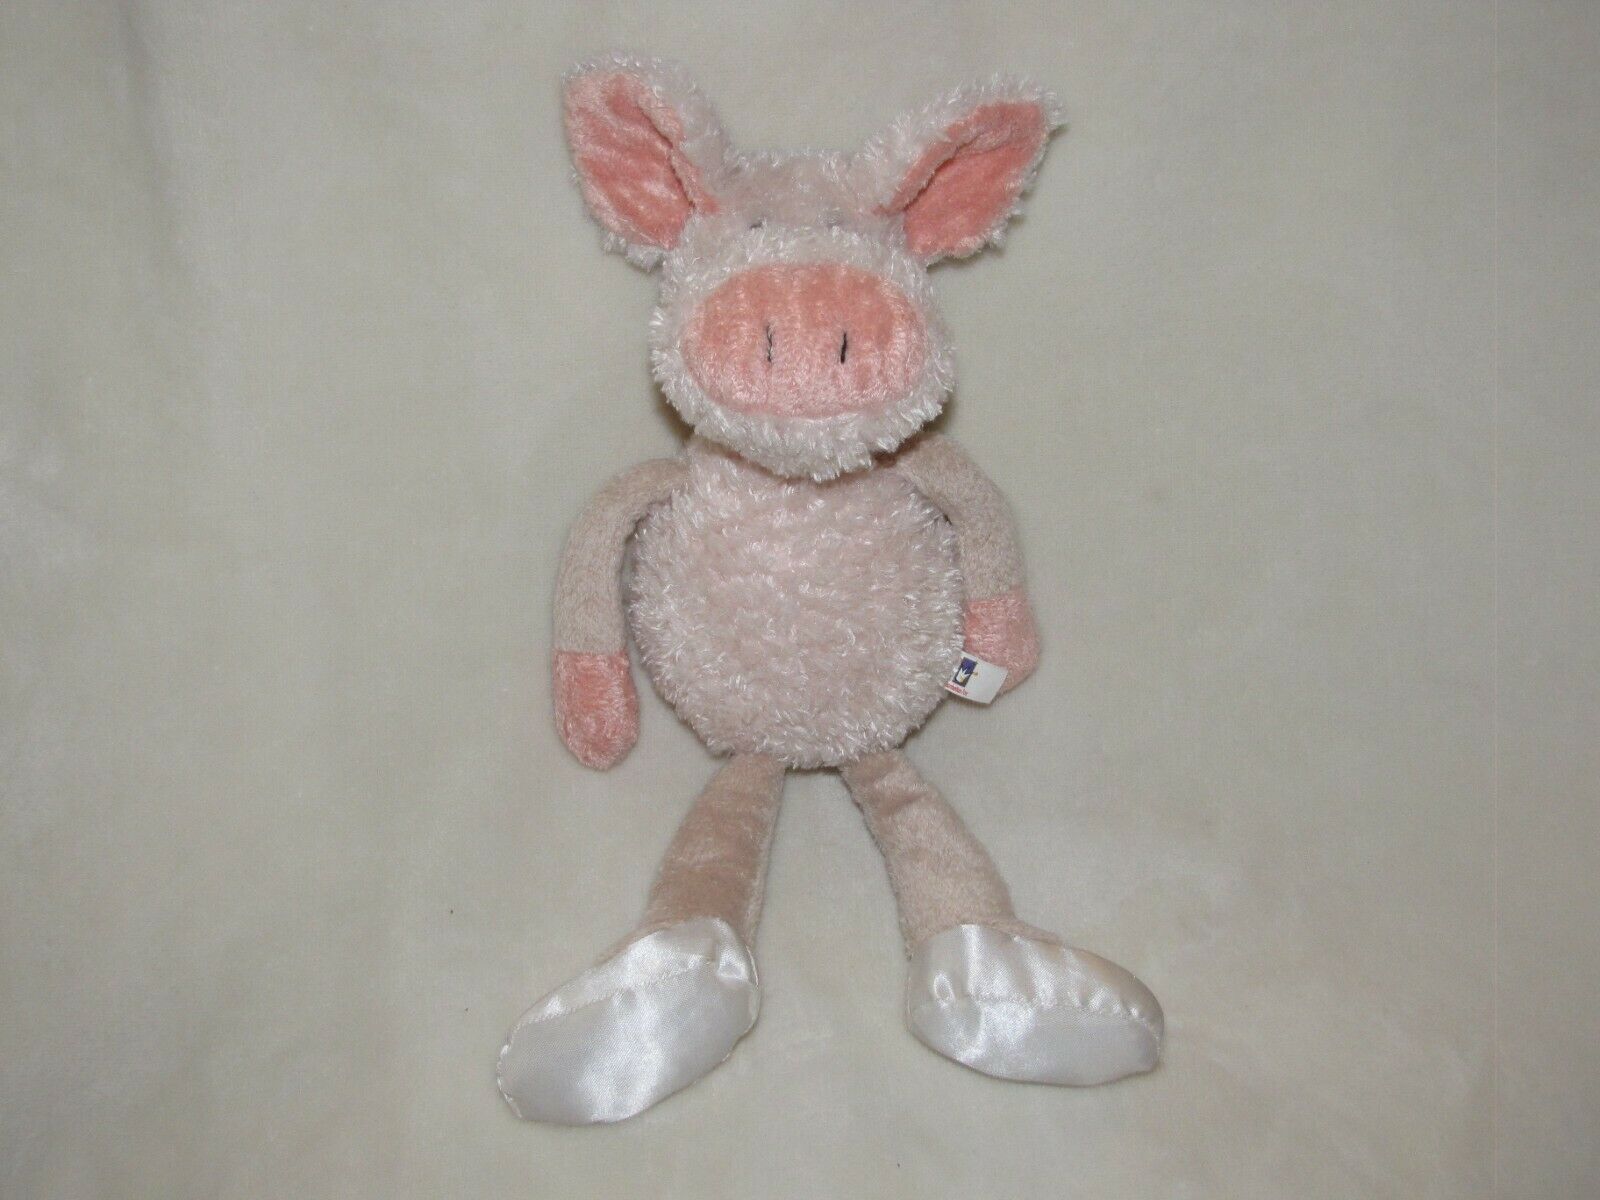 Primary image for 13" 2003 Manhattan Toy Stuffed Plush Pink Beanbag Pig White Satin Shoes Slippers